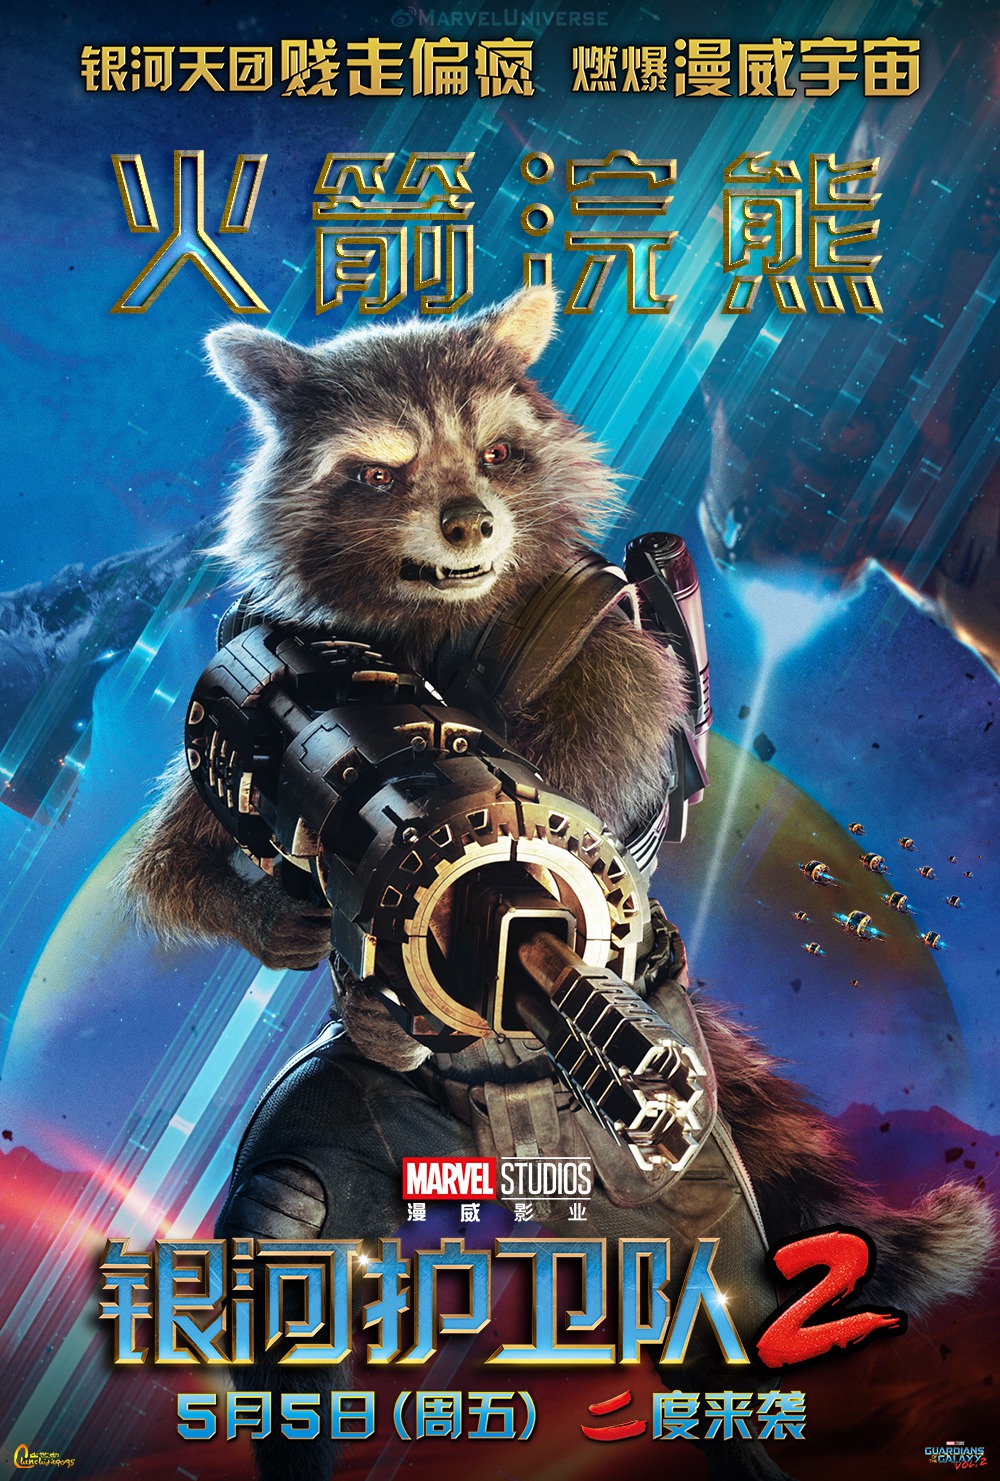 Extra Large Movie Poster Image for Guardians of the Galaxy Vol. 2 (#39 of 45)